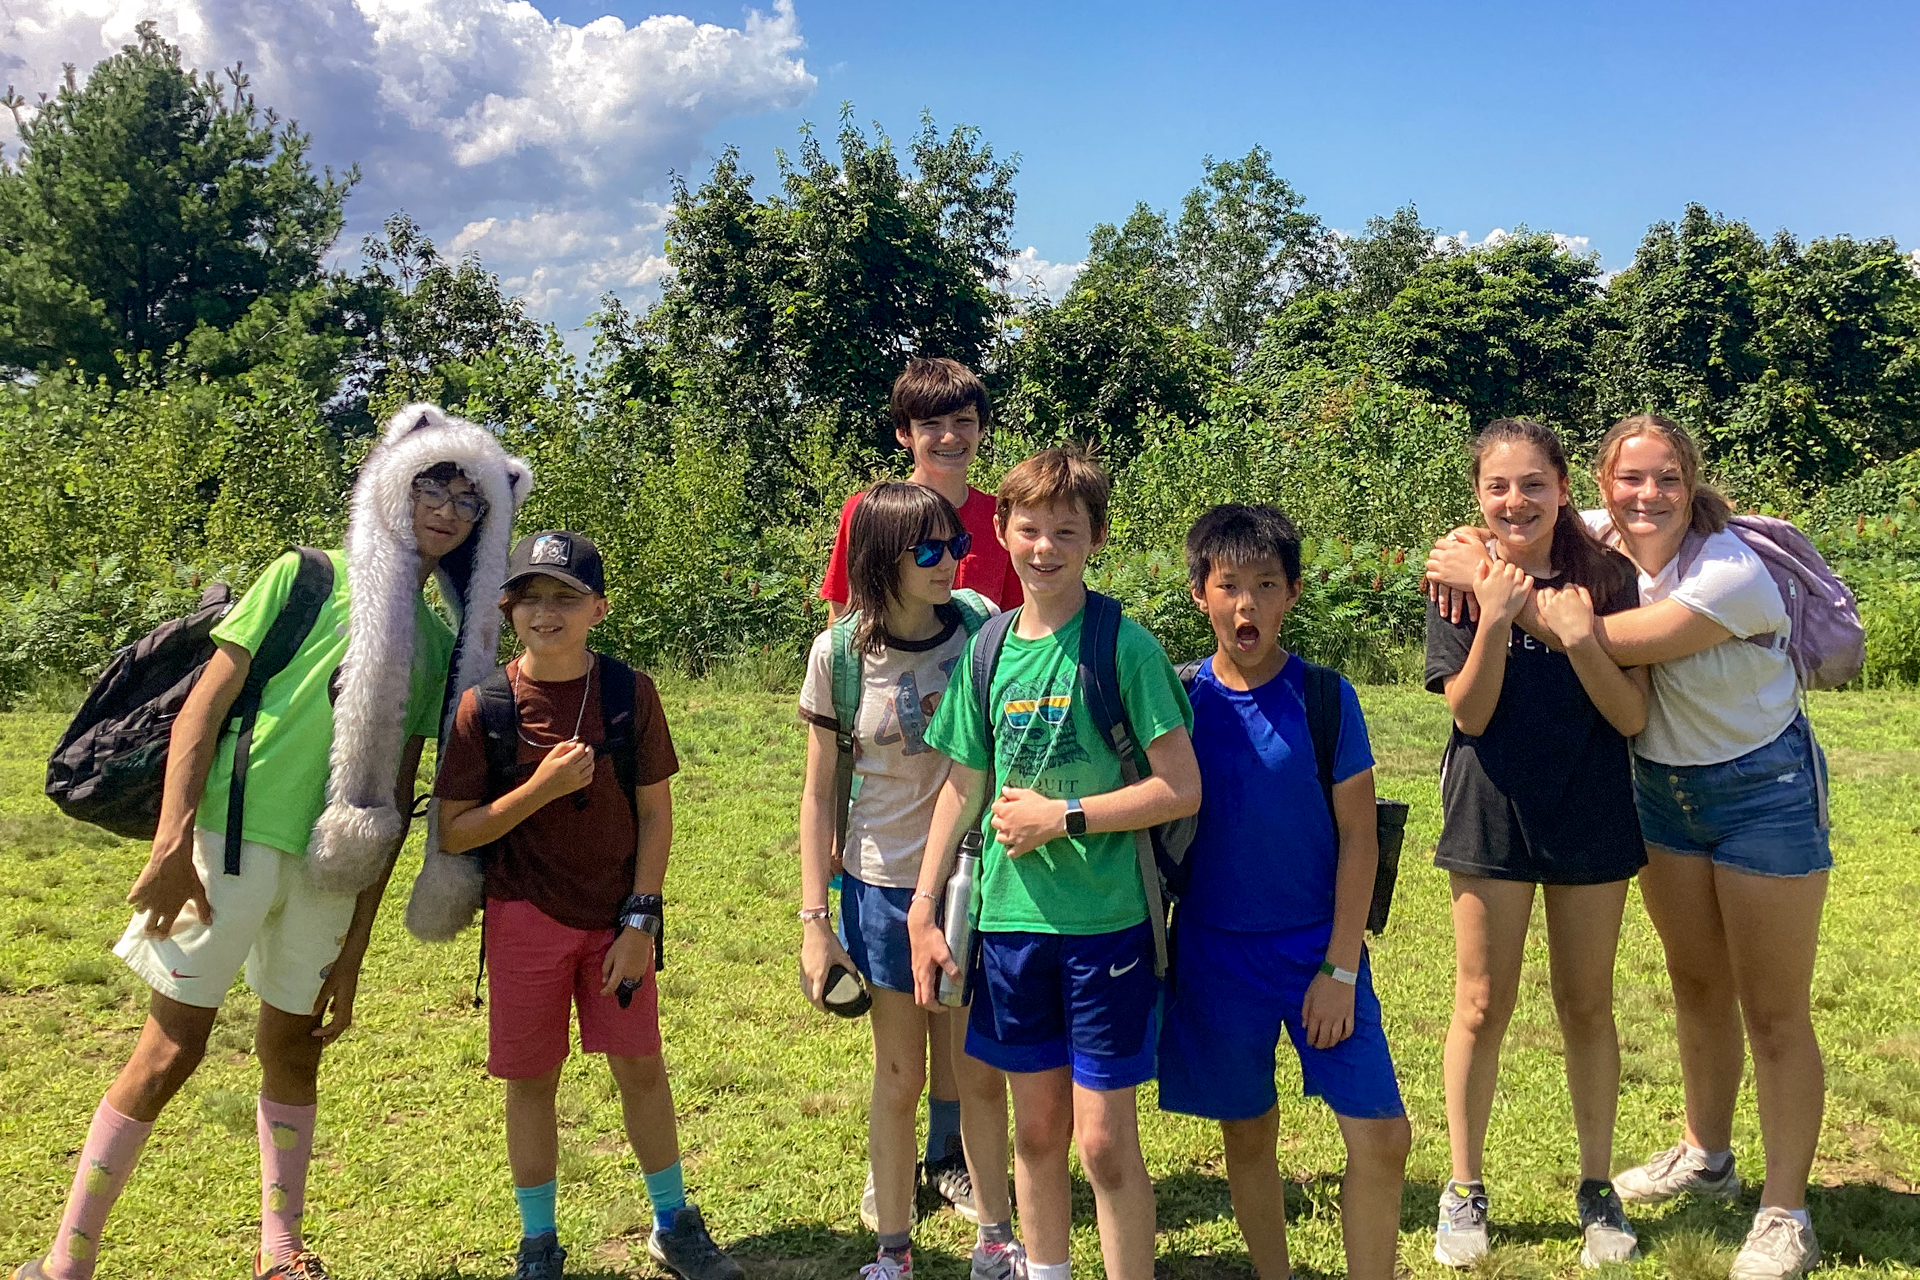 A group of Blue Hills campers poses for the camera with smiles; one is wearing a silly faux fur hat and a few have their arms around each other in side hugs.